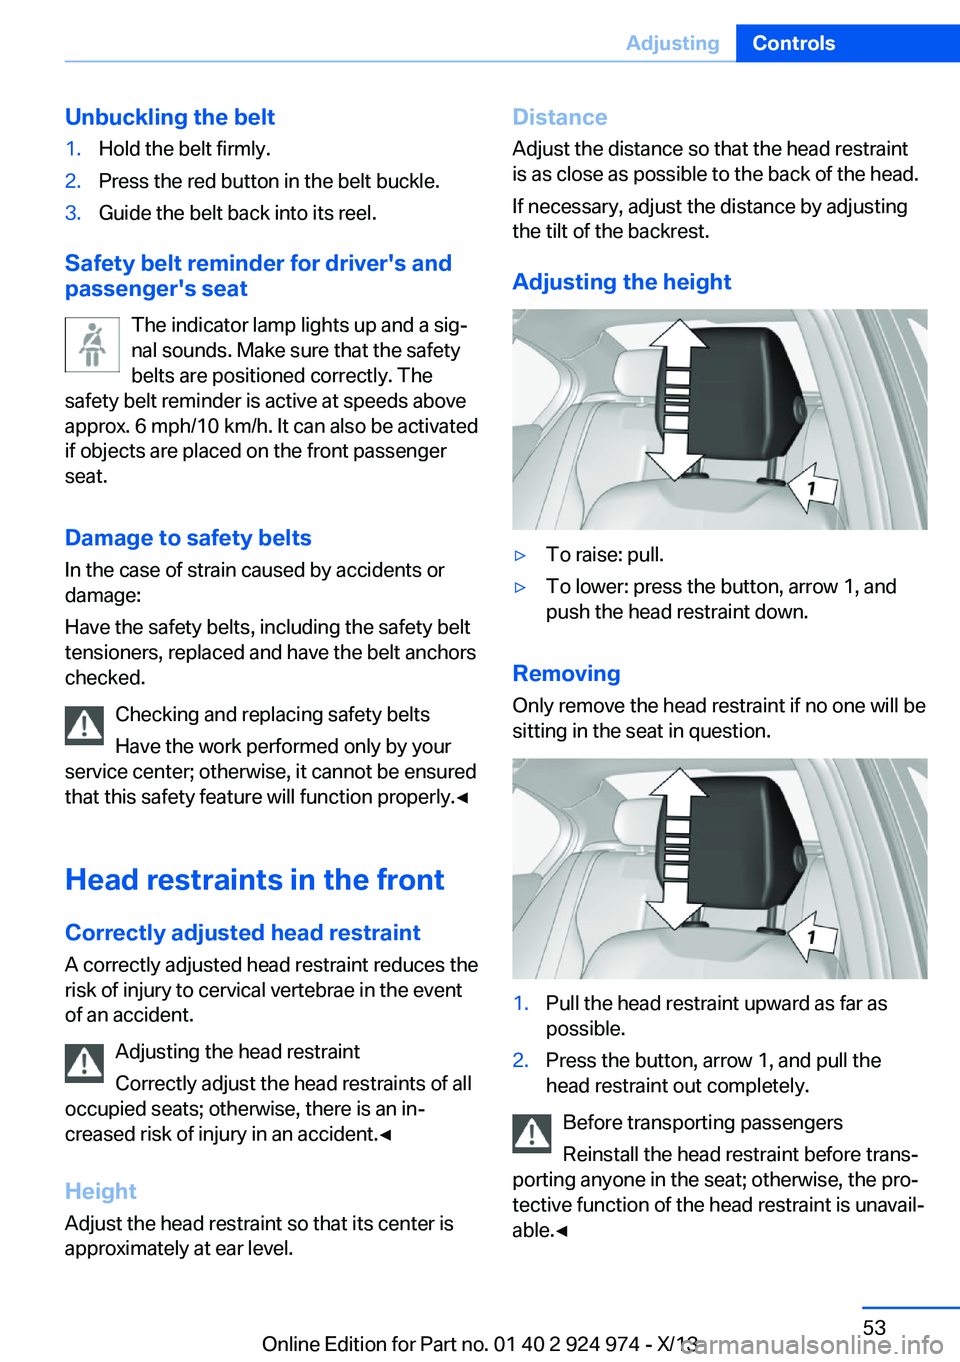 BMW 228ICOUPE 2014  Owners Manual Unbuckling the belt1.Hold the belt firmly.2.Press the red button in the belt buckle.3.Guide the belt back into its reel.
Safety belt reminder for driver's and
passenger's seat
The indicator la